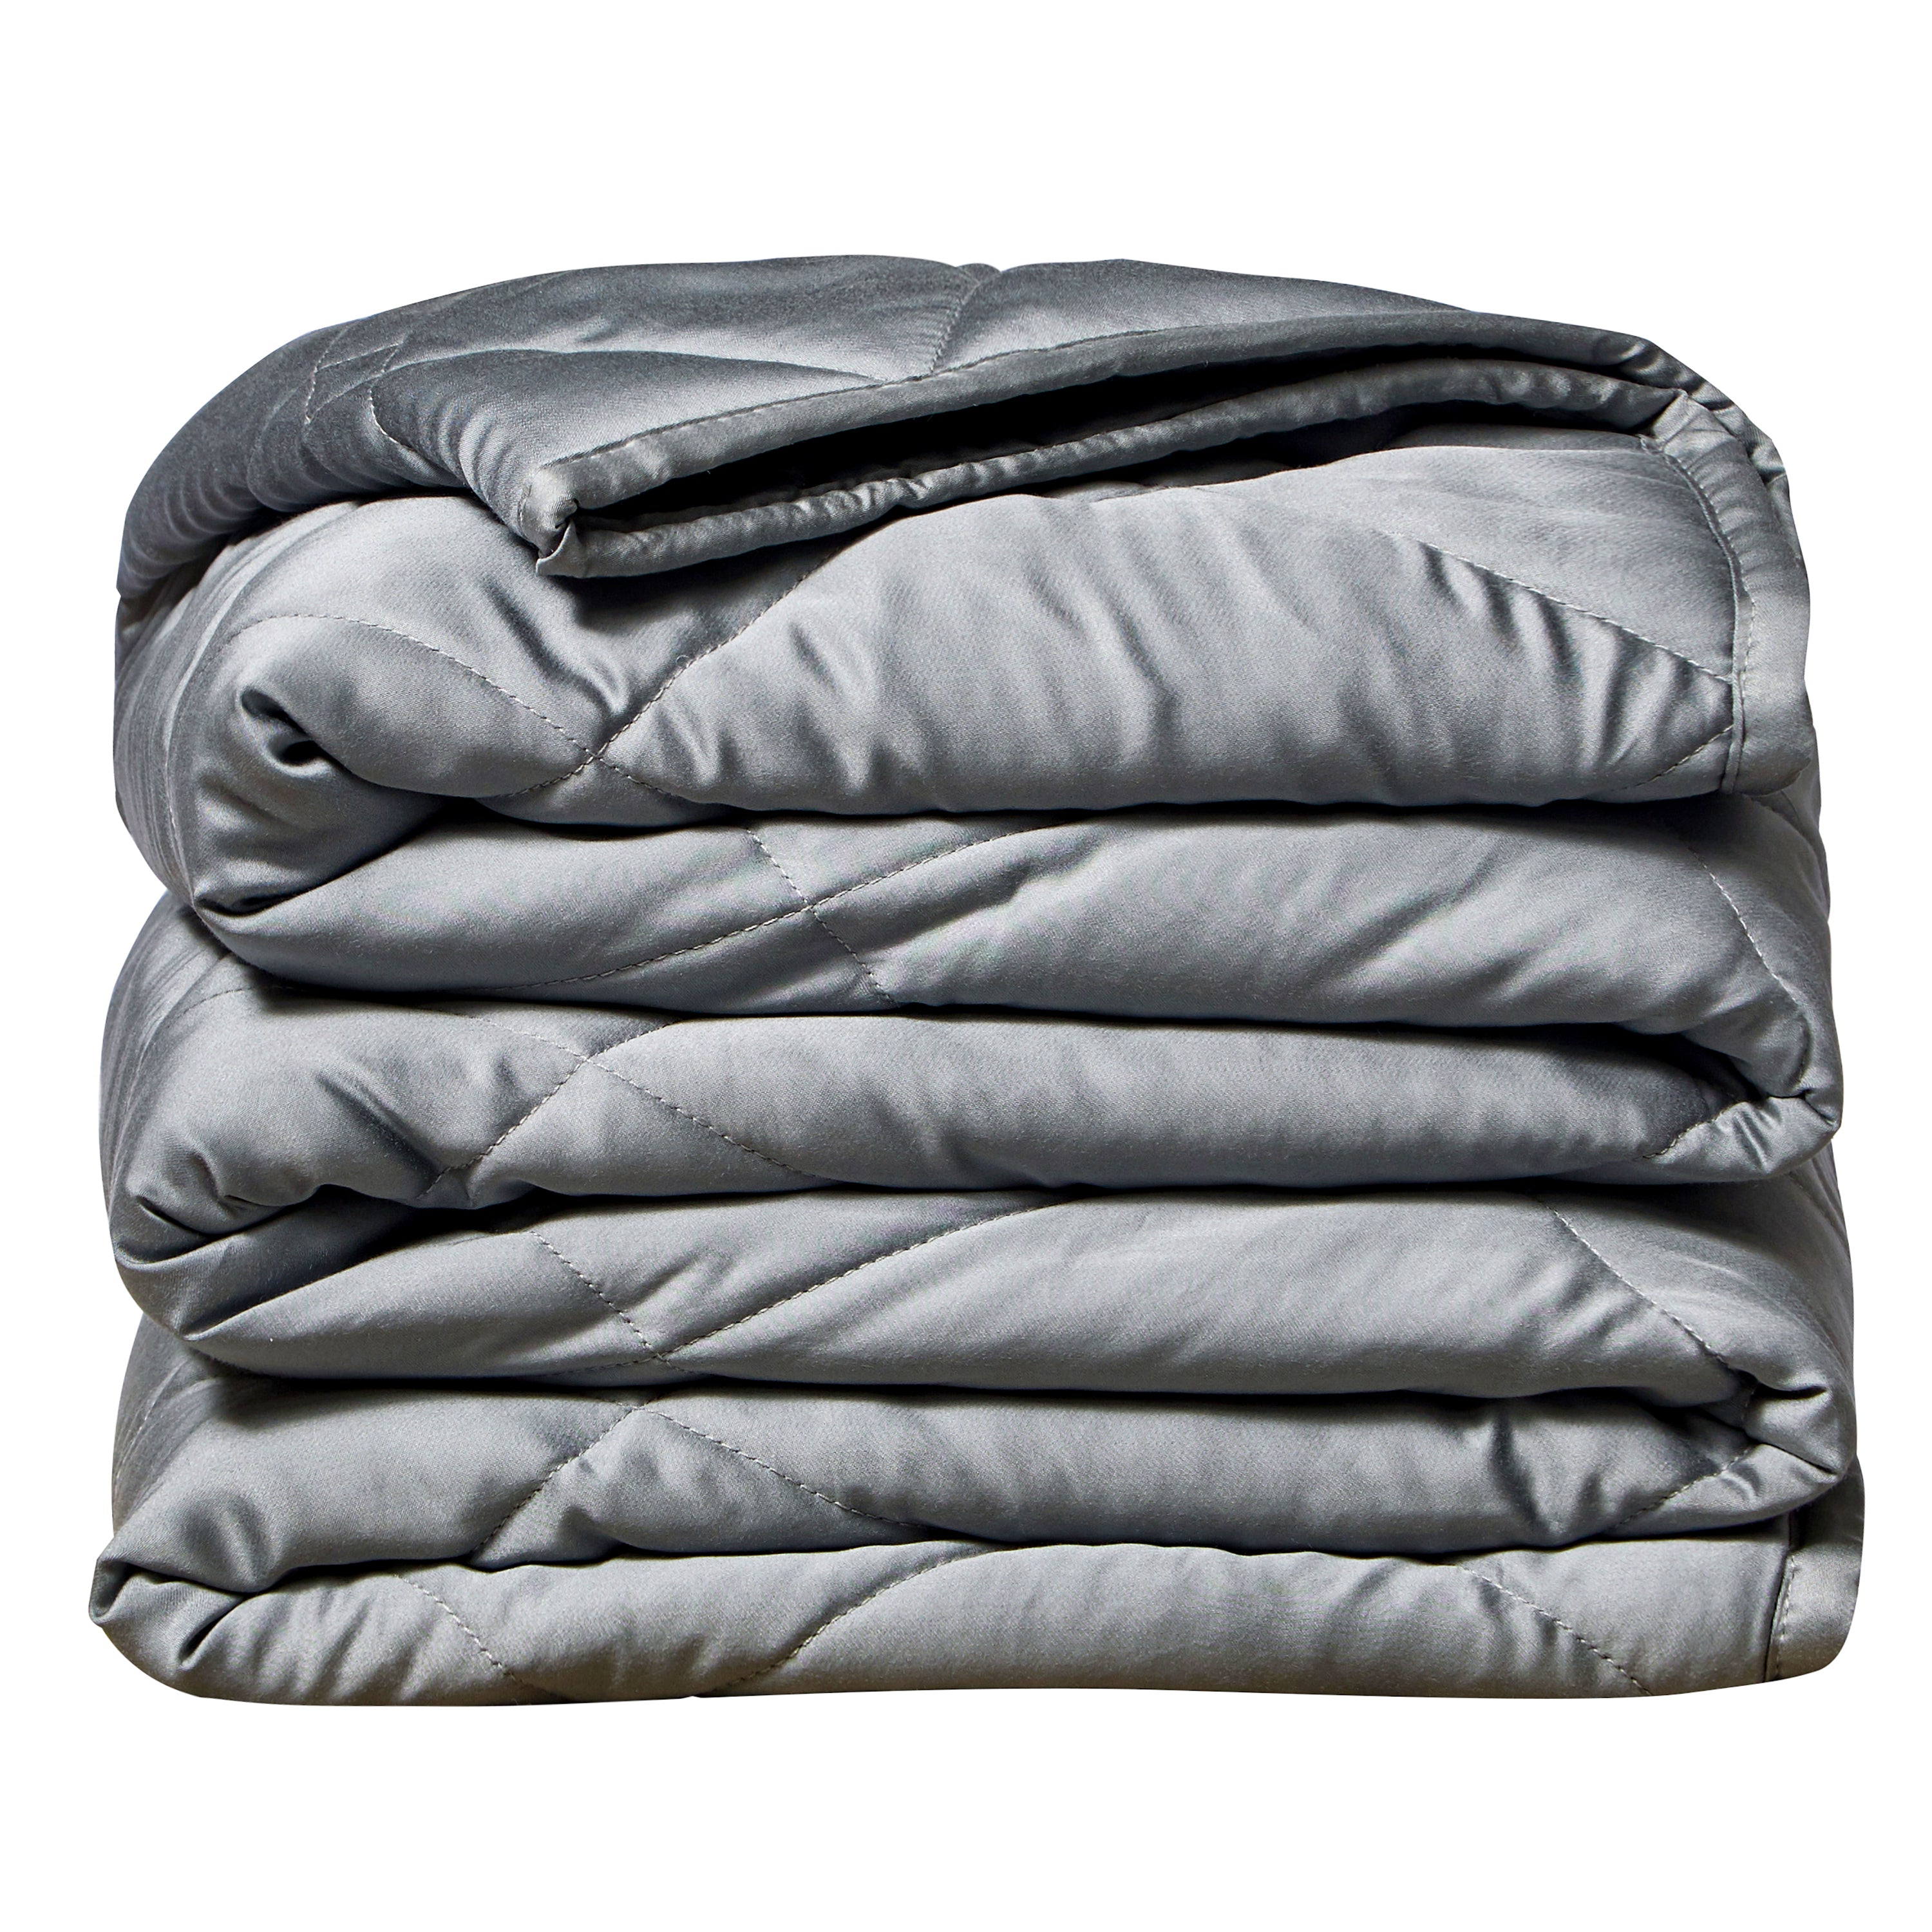 Breathable Rayon from Bamboo Weighted Blanket- 10, 12 & 15 lb (spend $100 to add bamboo 12 lb for free)